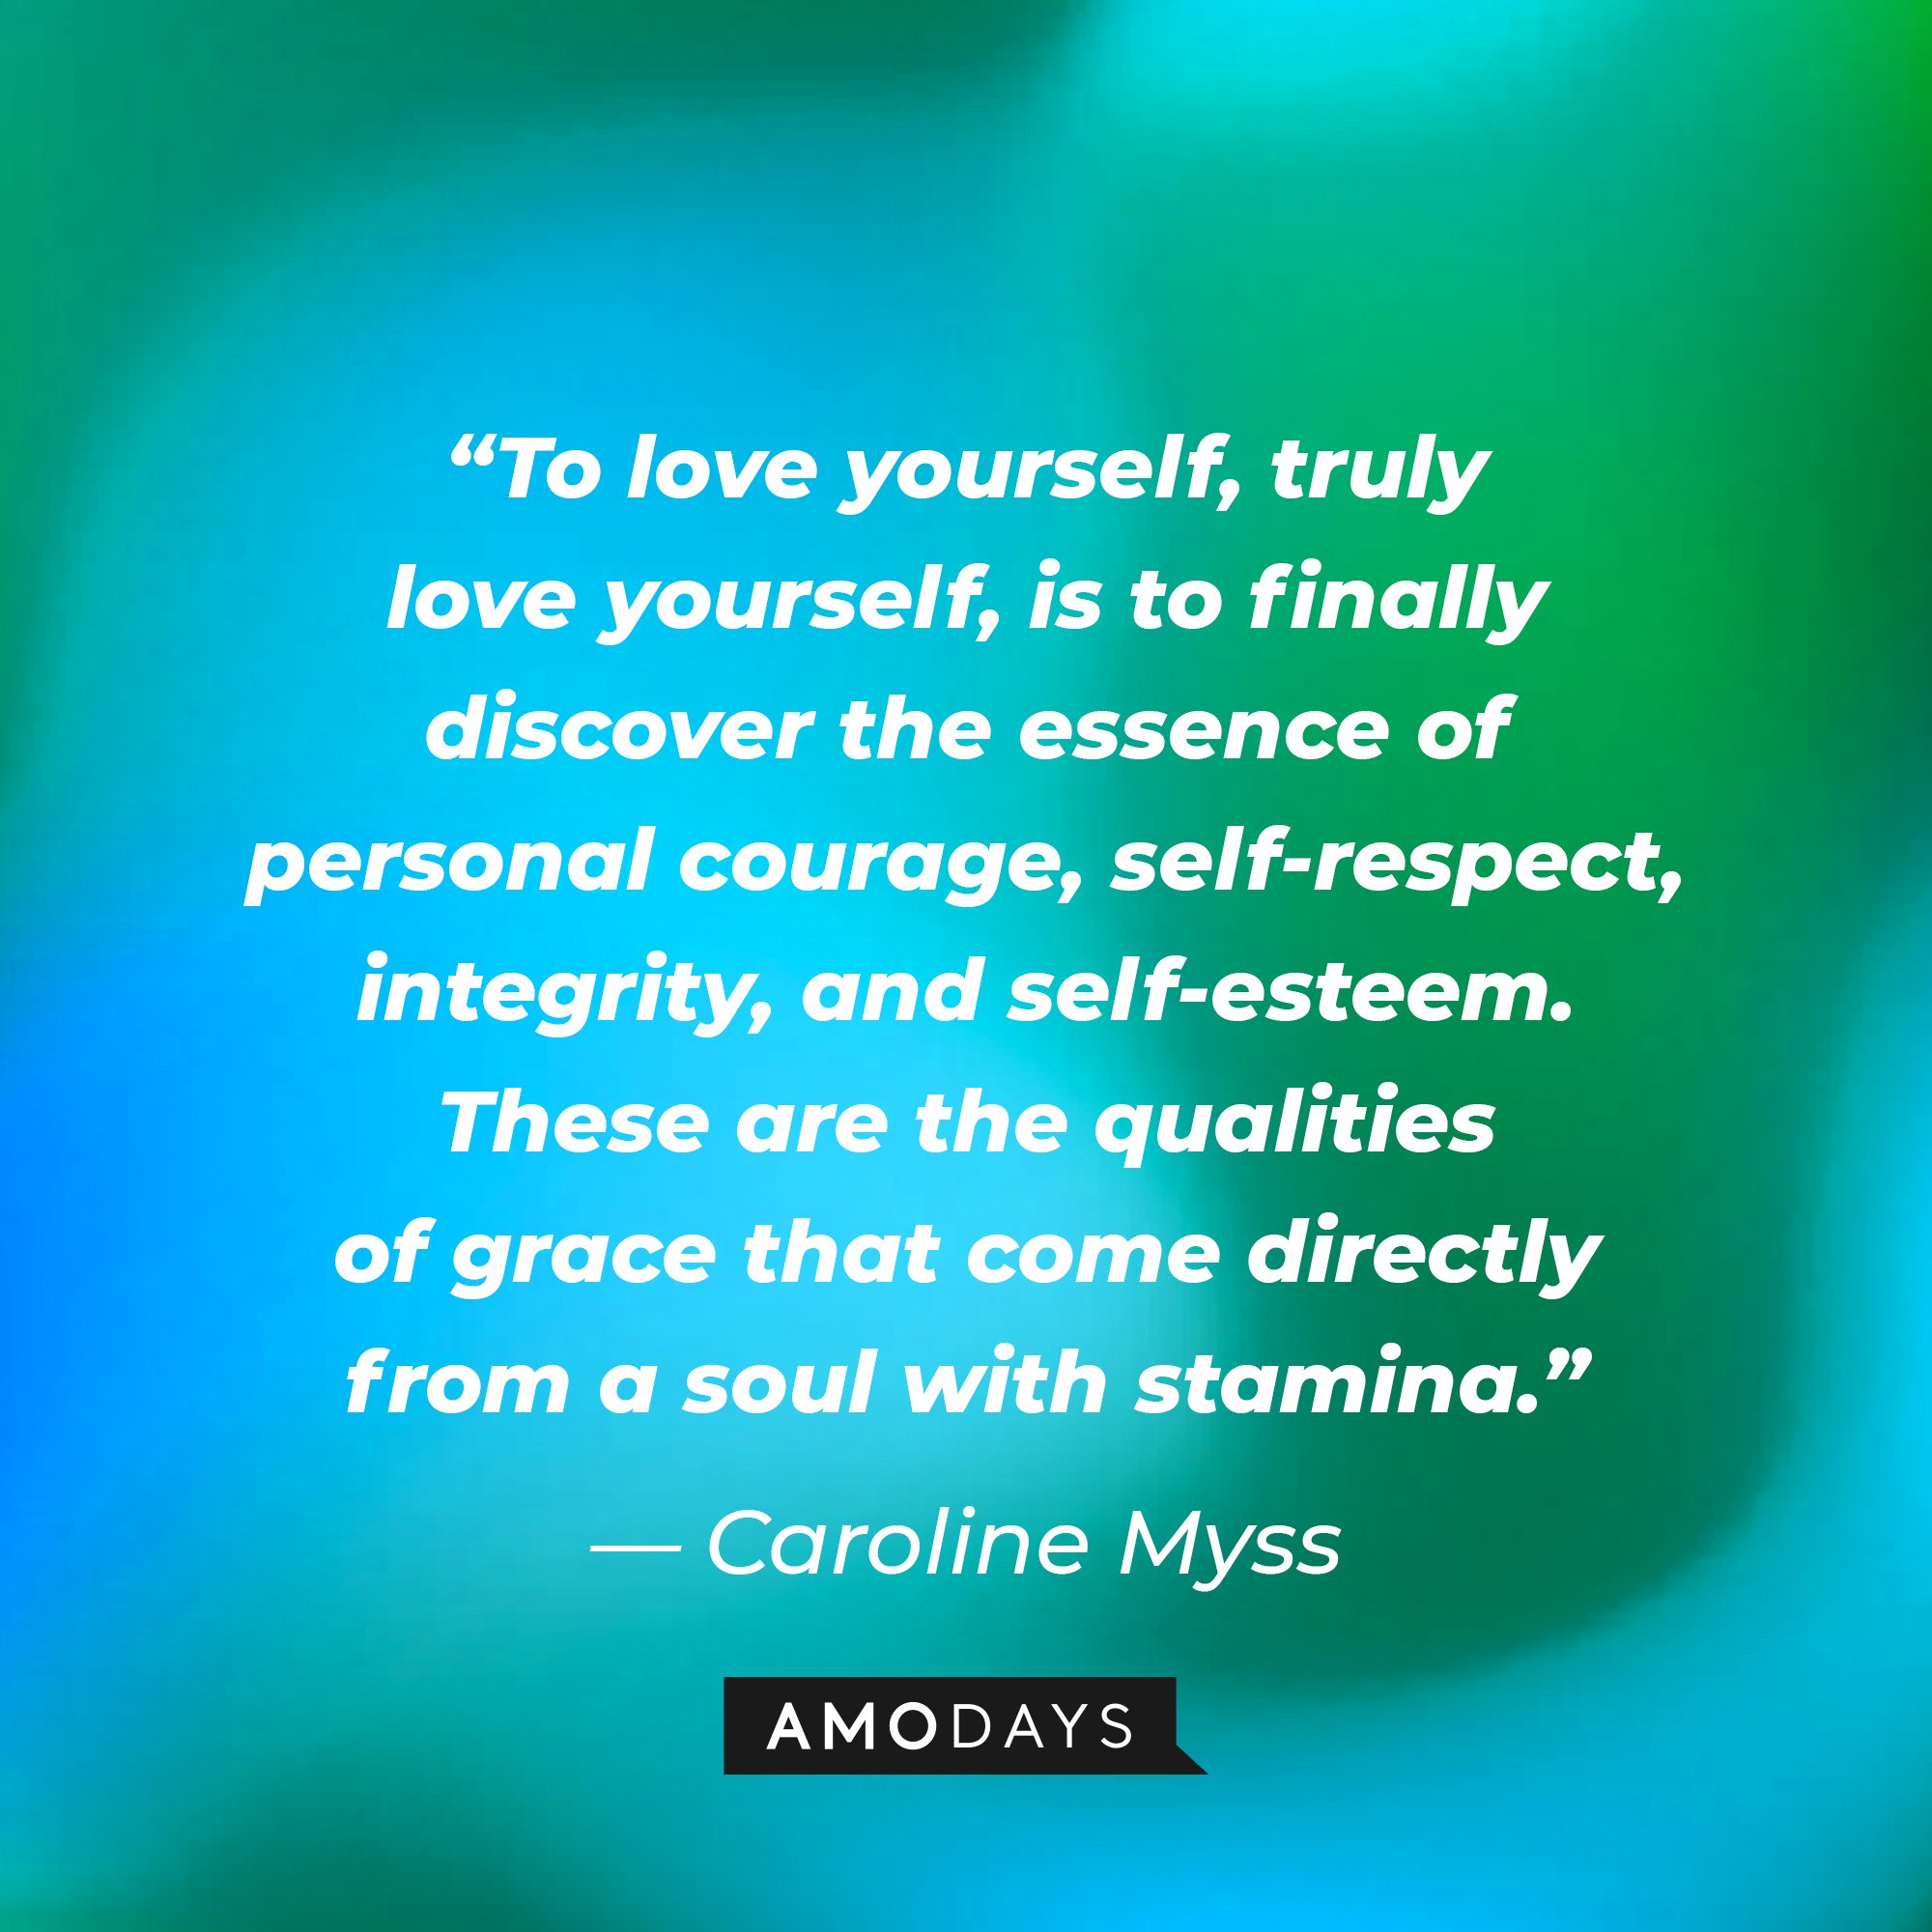 Caroline Myss’ quote: “To love yourself, truly love yourself, is to finally discover the essence of personal courage, self-respect, integrity, and self-esteem. These are the qualities of grace that come directly from a soul with stamina.” | Image: AmoDays